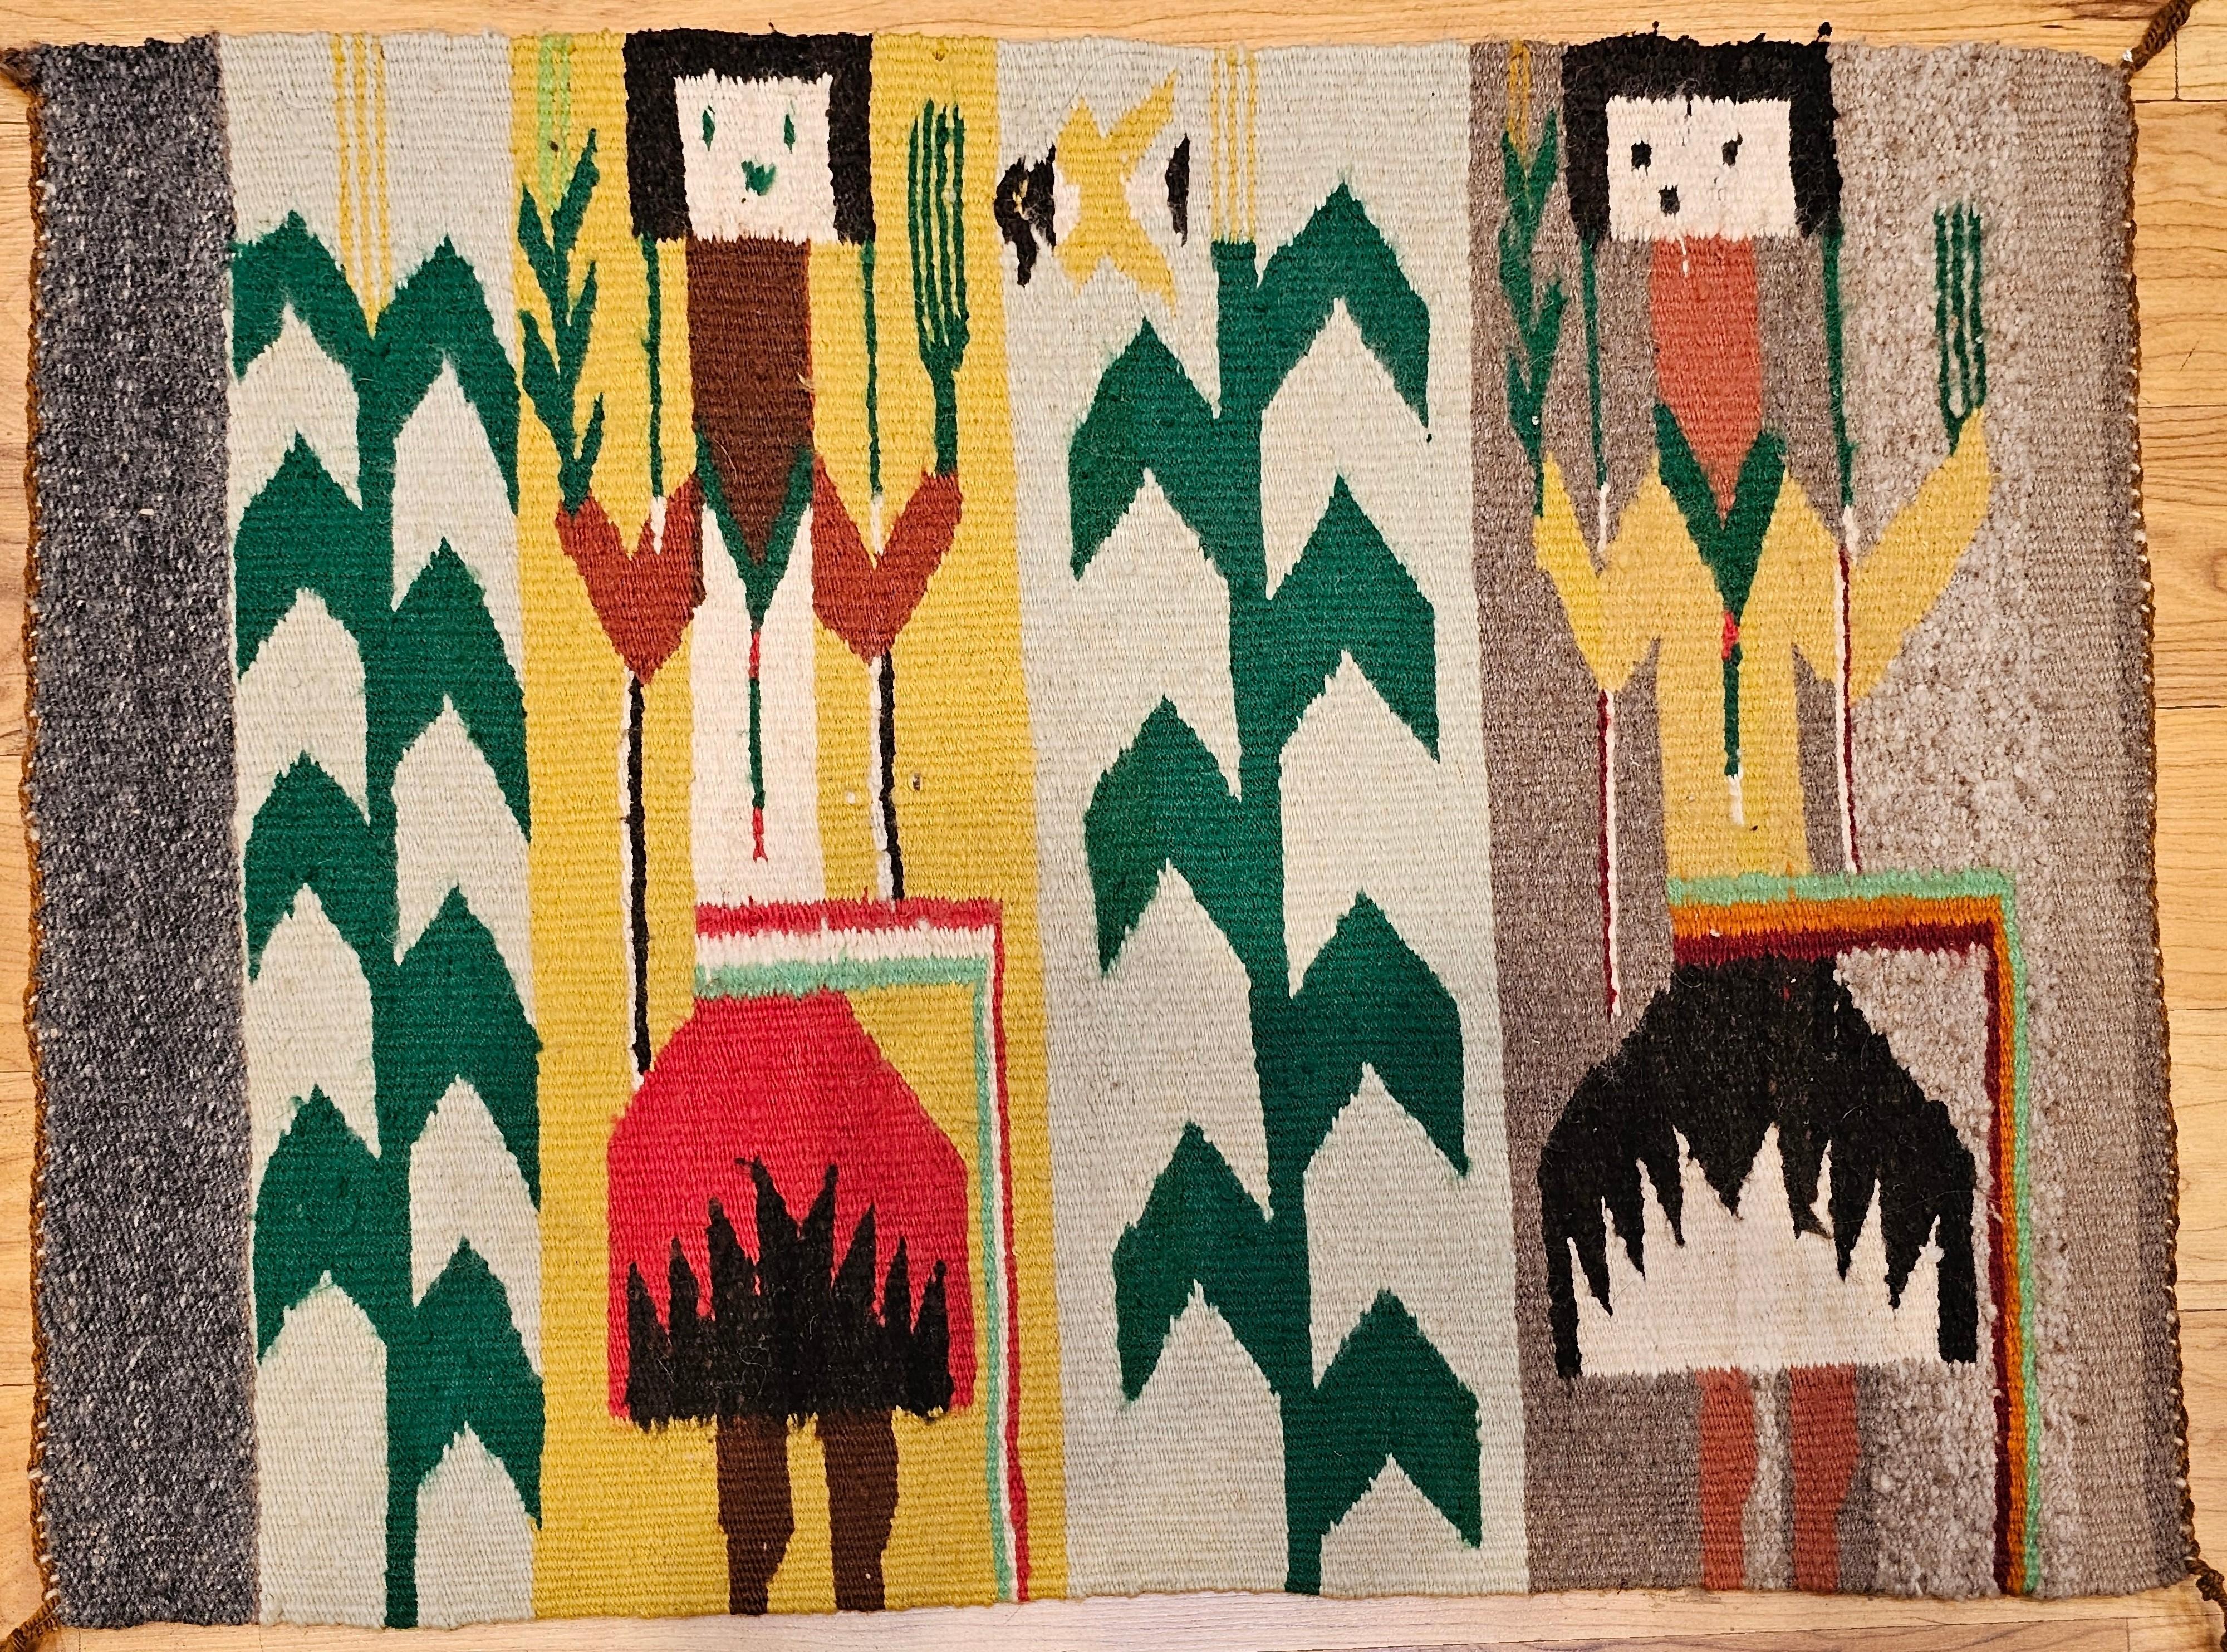 Vintage Native American Navajo Yei rug from the 3rd quarter of the 1900s.  The design of this Navajo Yei contains two deity forms standing with corn stalks next to each. In Navajo mythology, the Yei are a group of deities who act as mediators